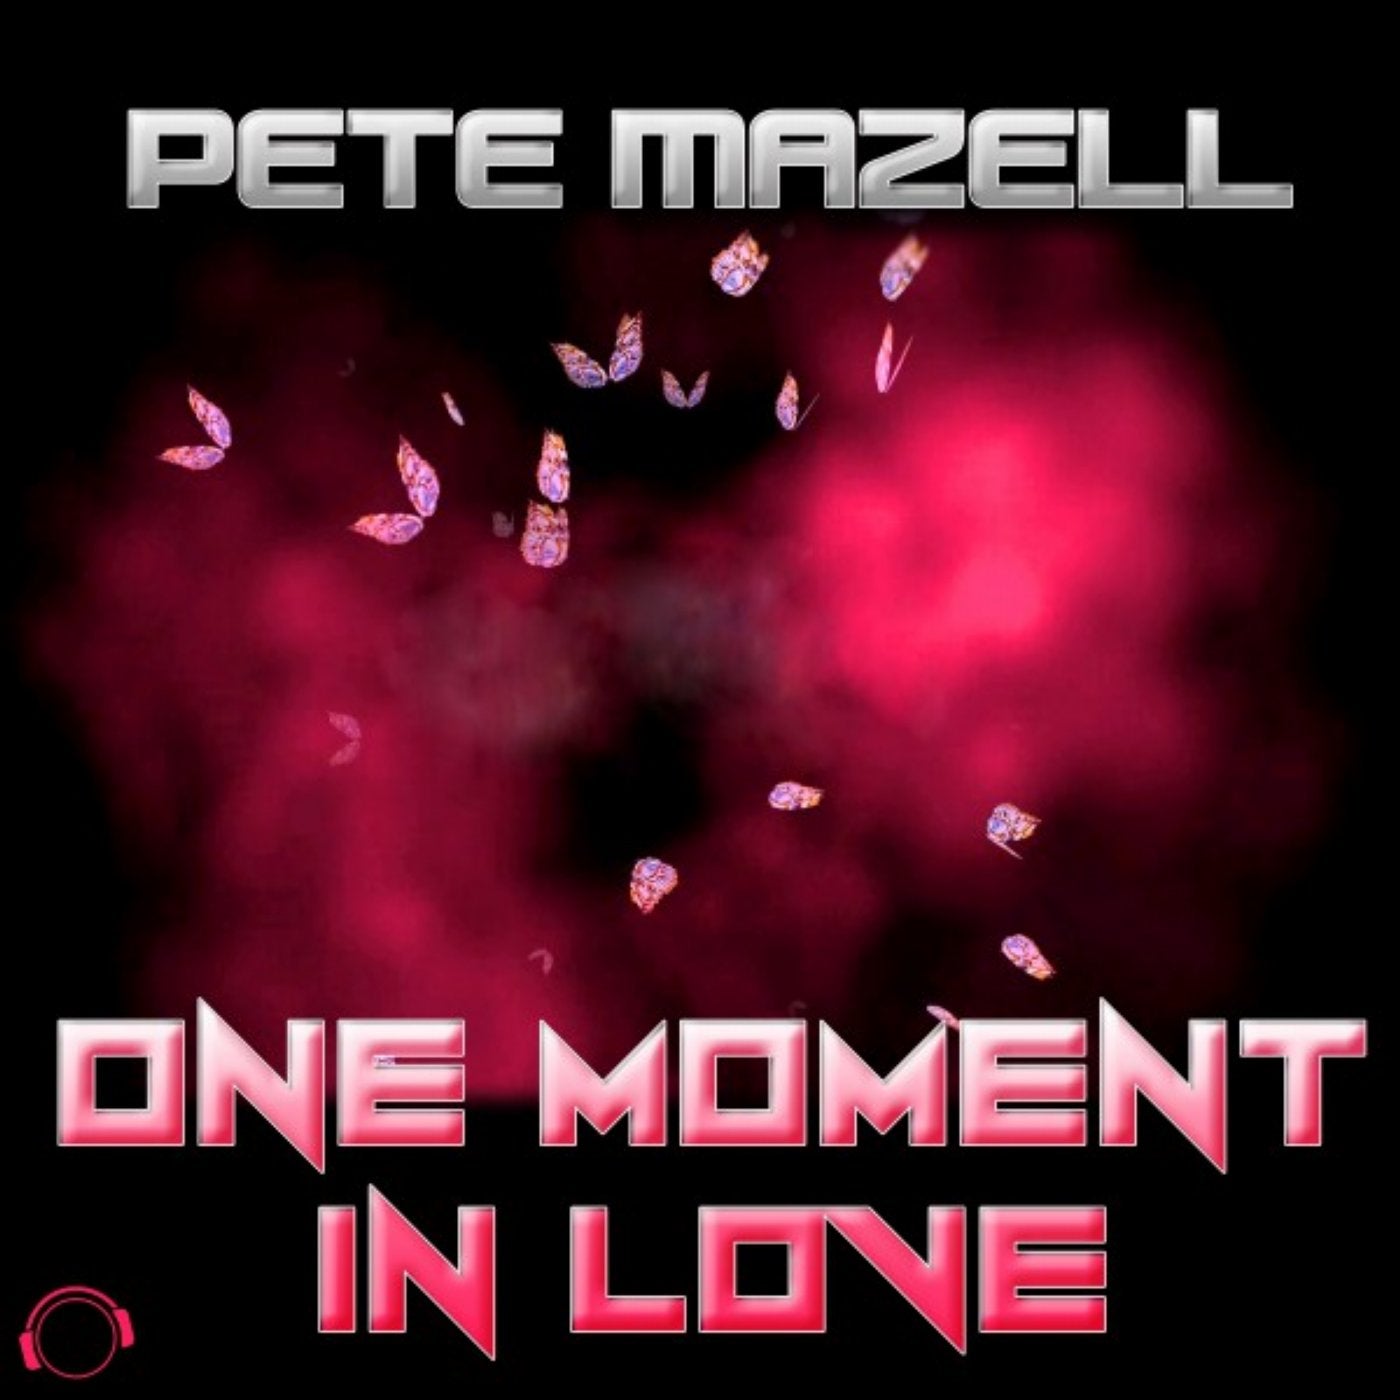 One Moment in Love